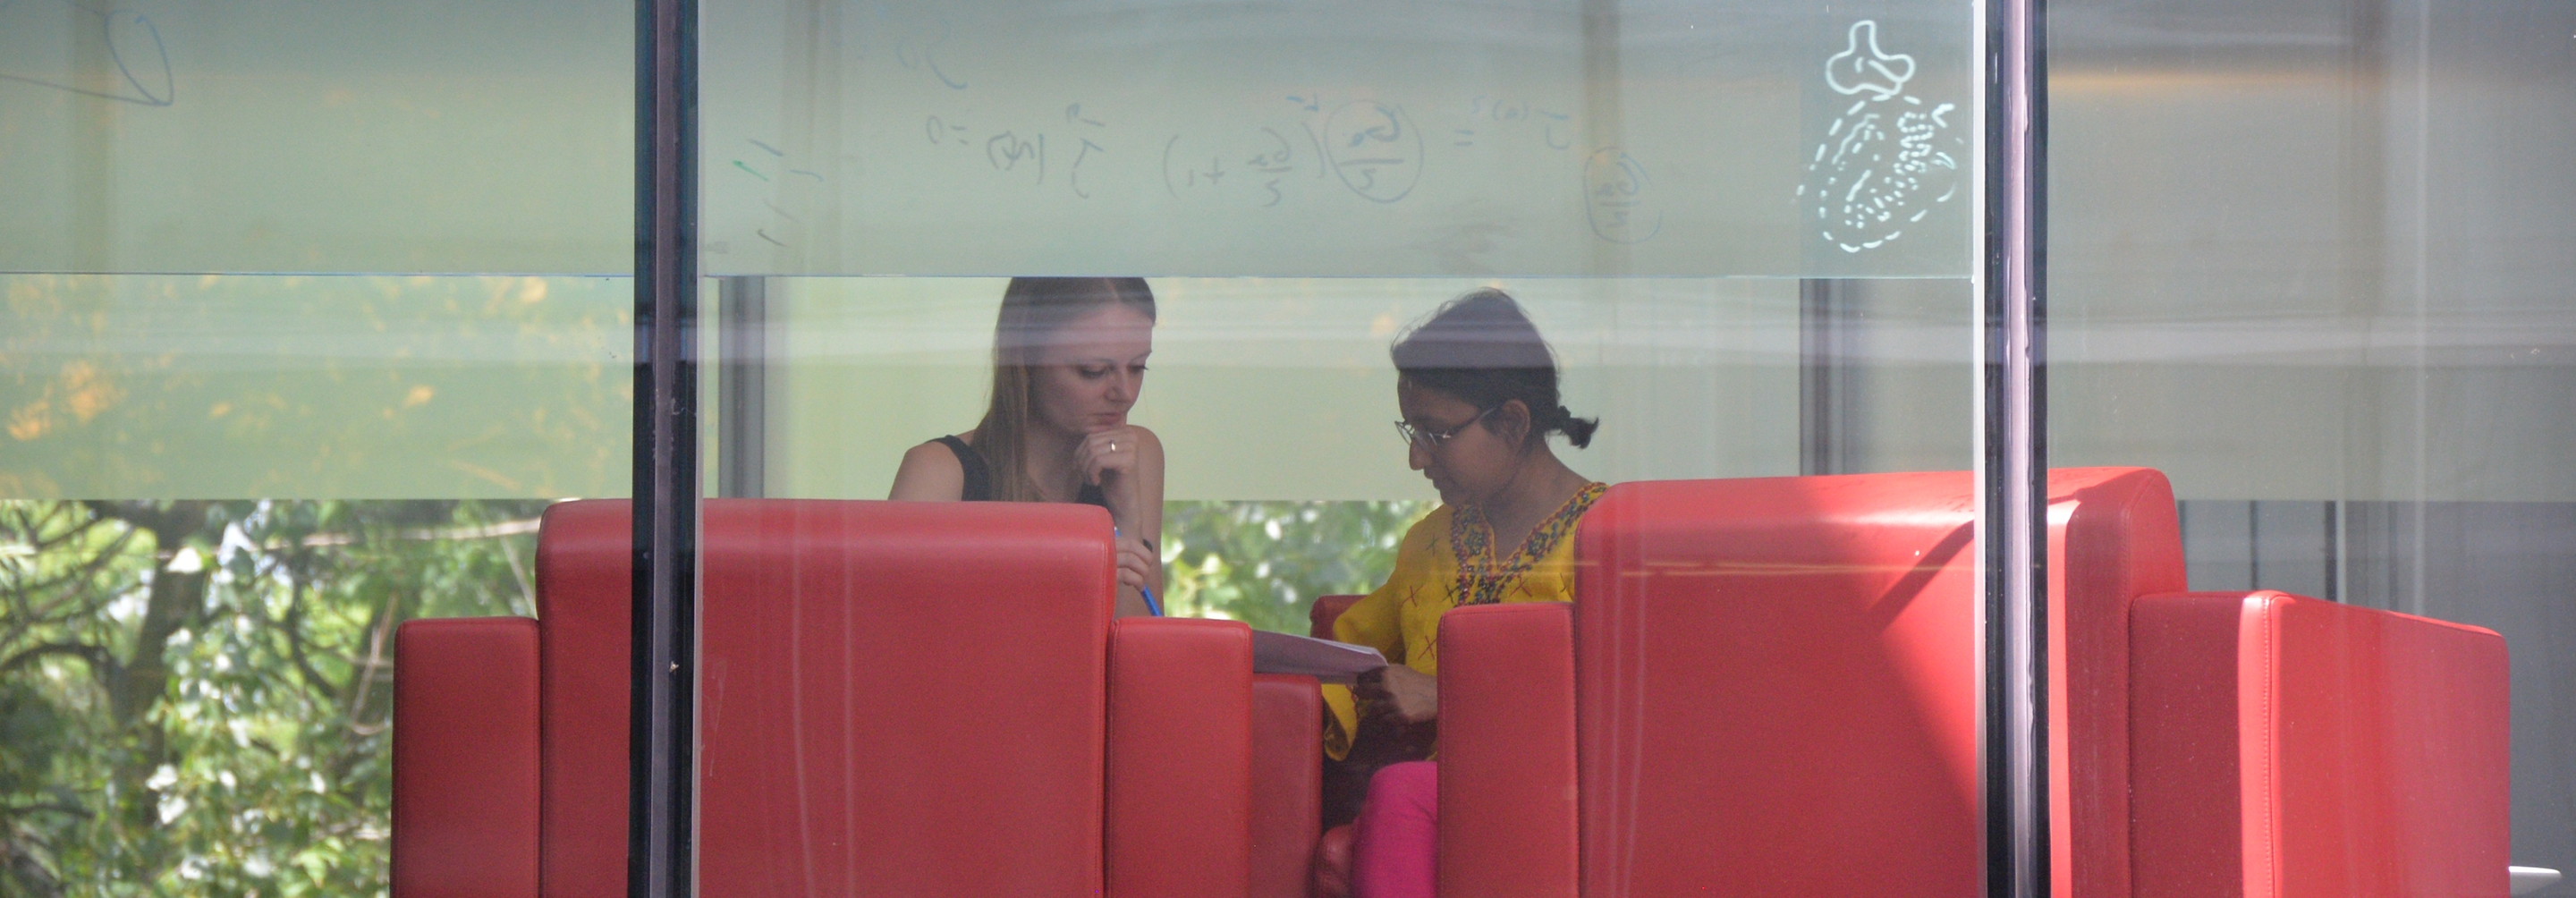 Looking through a window to see two women sitting together having a discussion